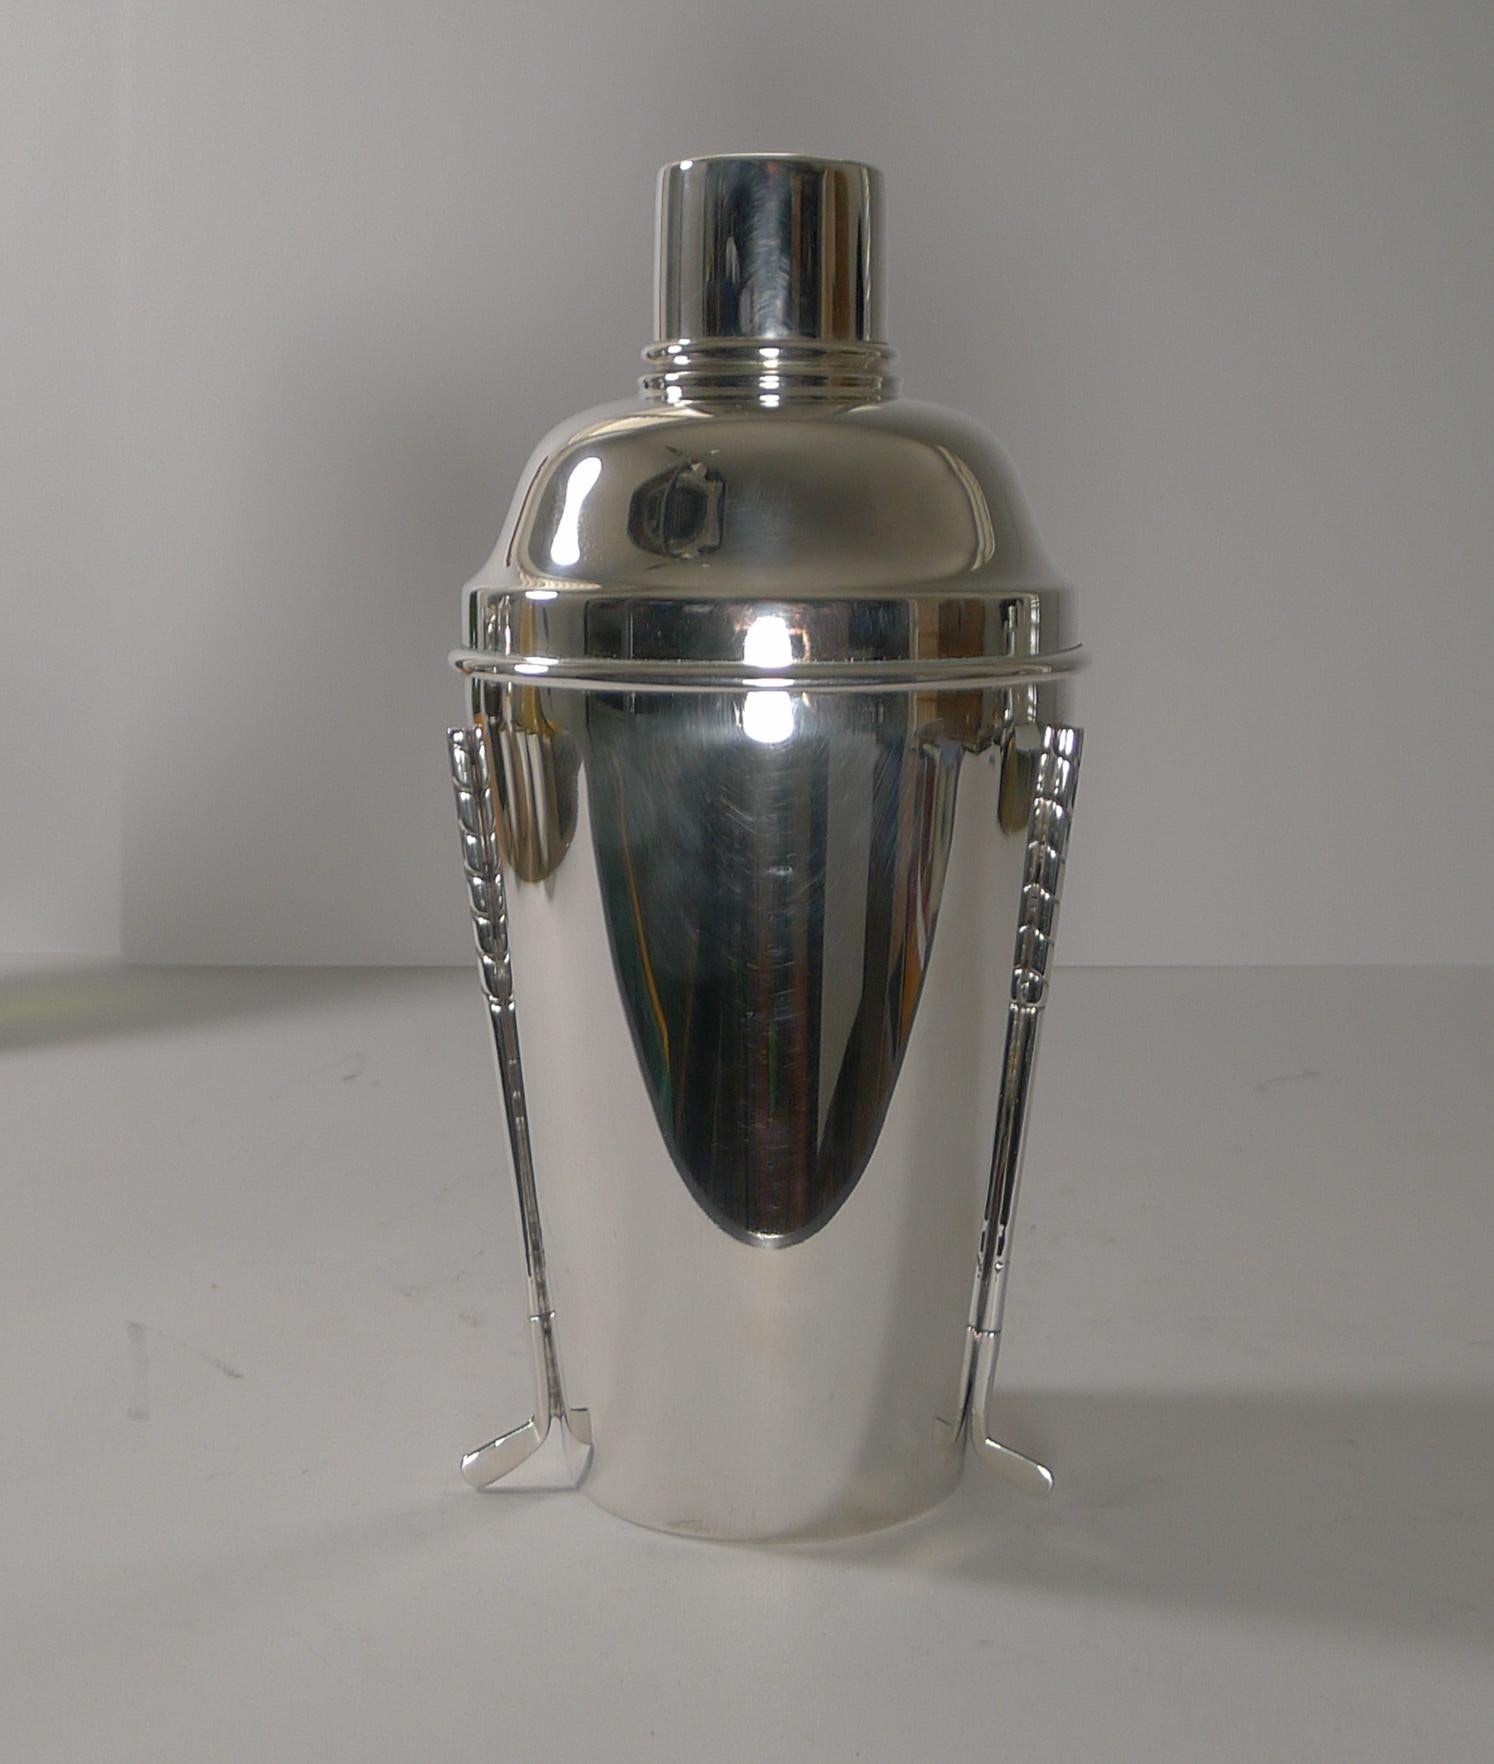 A rare and magnificent Golf Club cocktail shaker made in silver plate by the famous Sheffield silversmith, Walker & Hall, fully marked on the underside.

The body is mounted with three golf clubs, very rarely found and this one is a good large